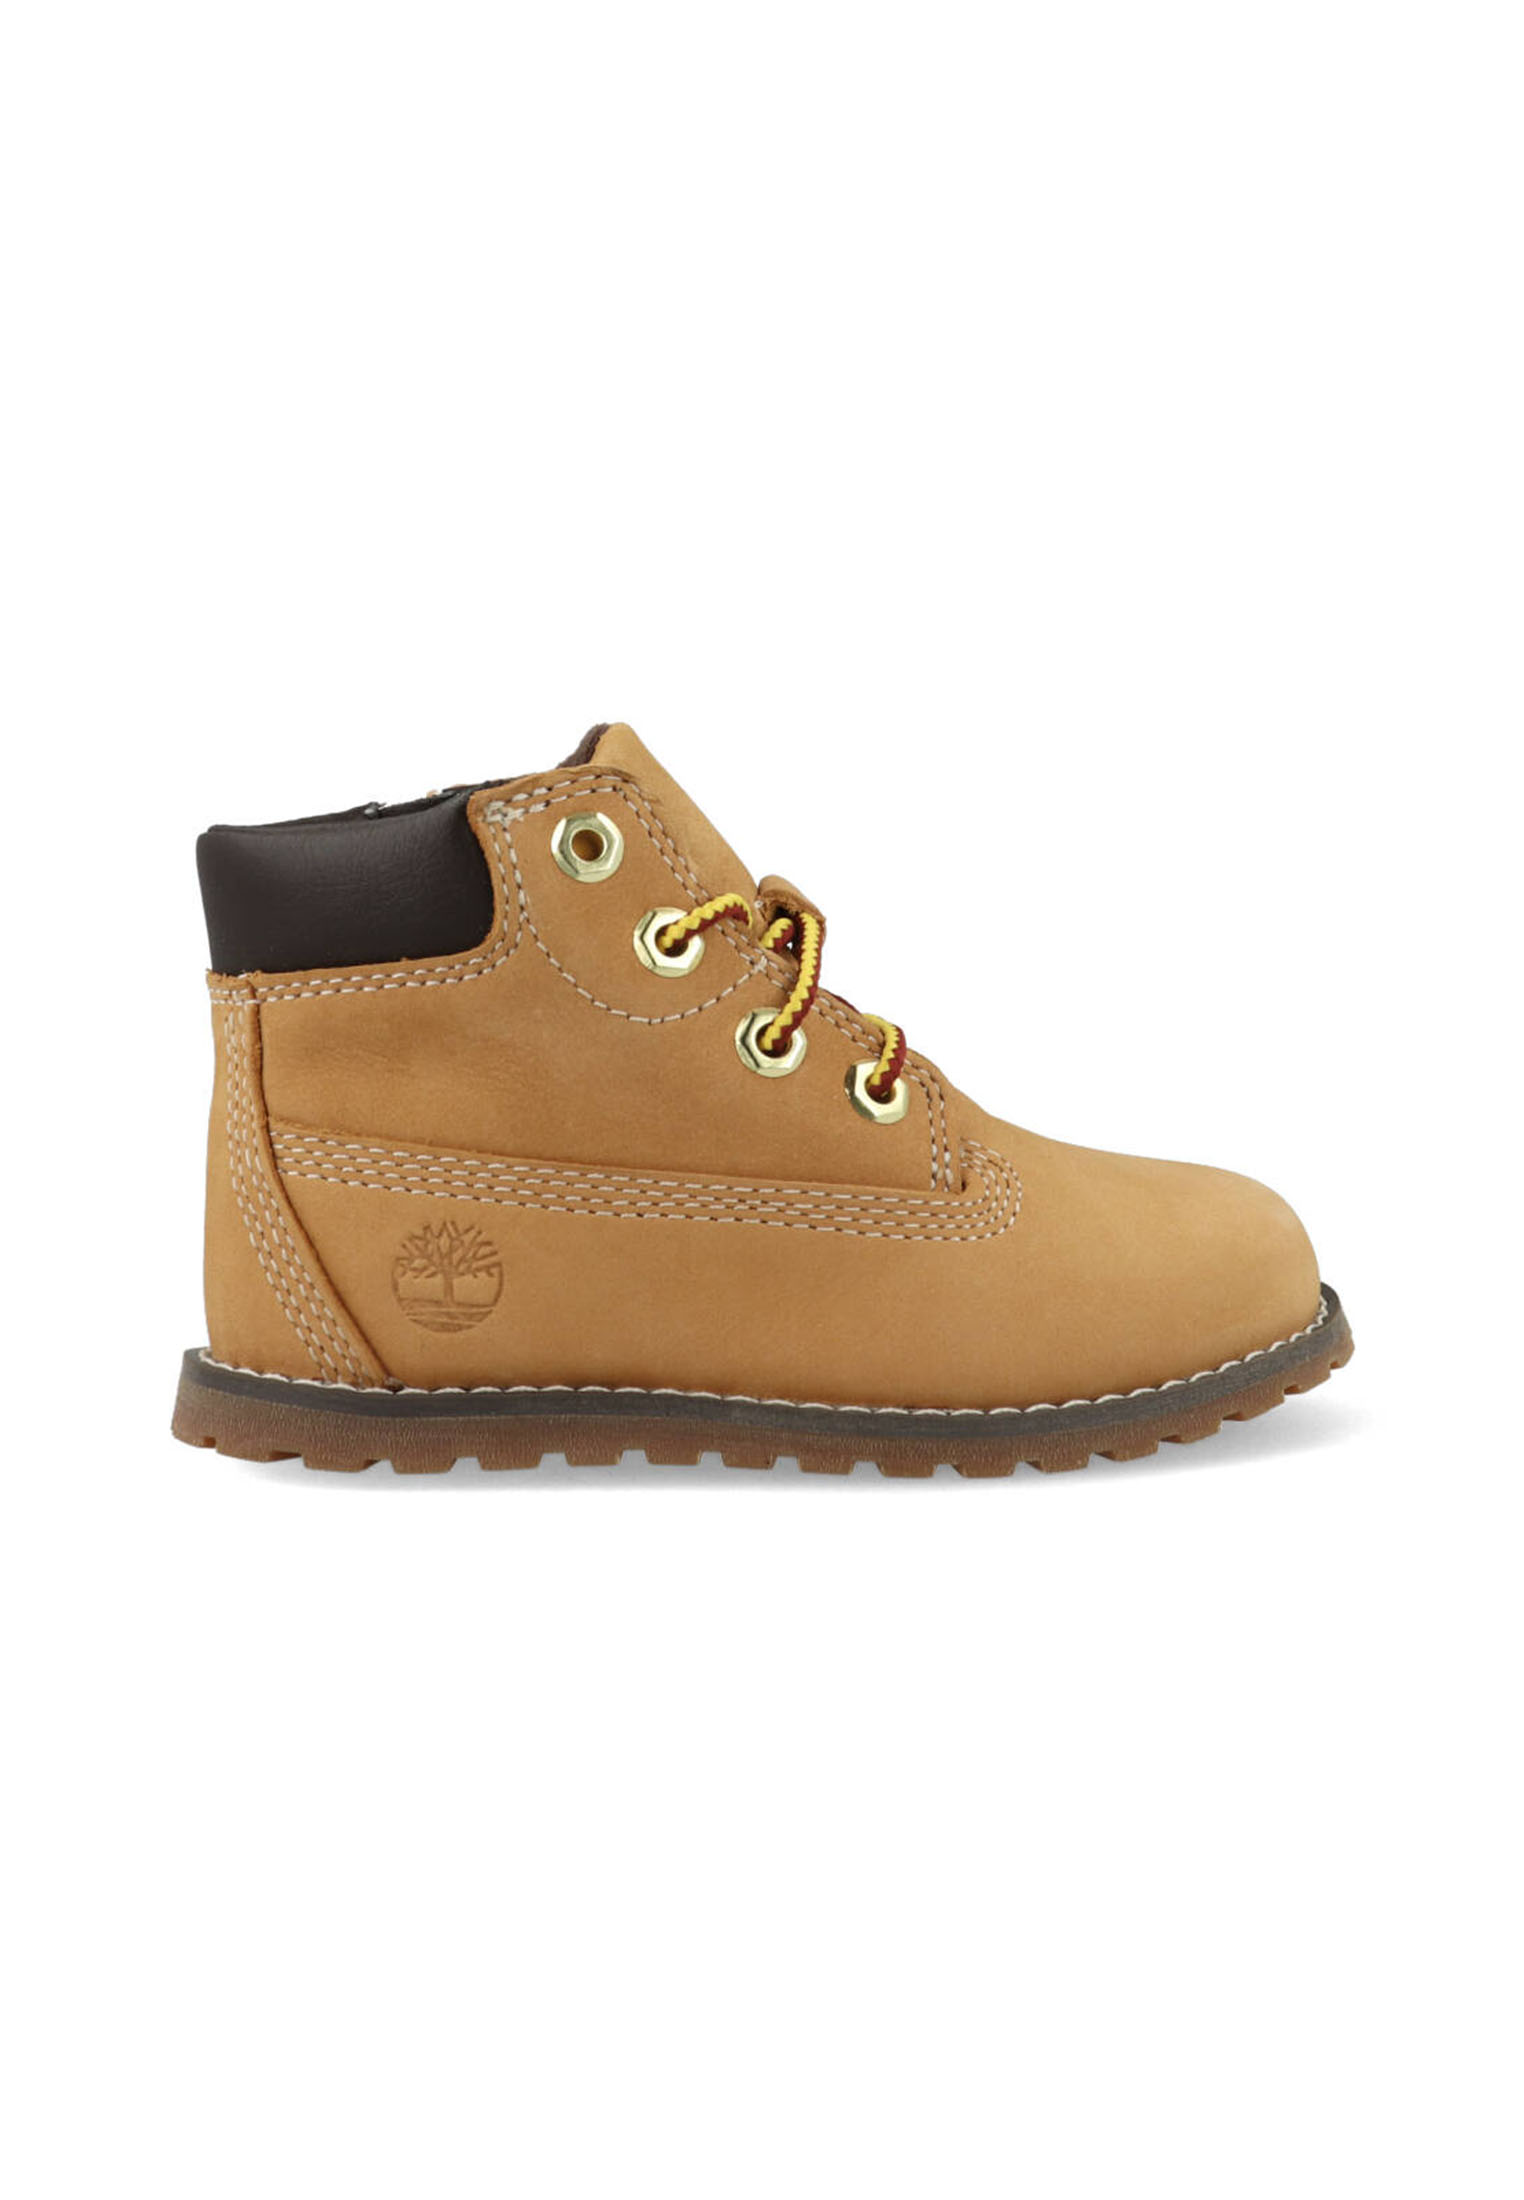 Timberland Pokey Pine 6-inch Boots A125Q Bruin-24 maat 24